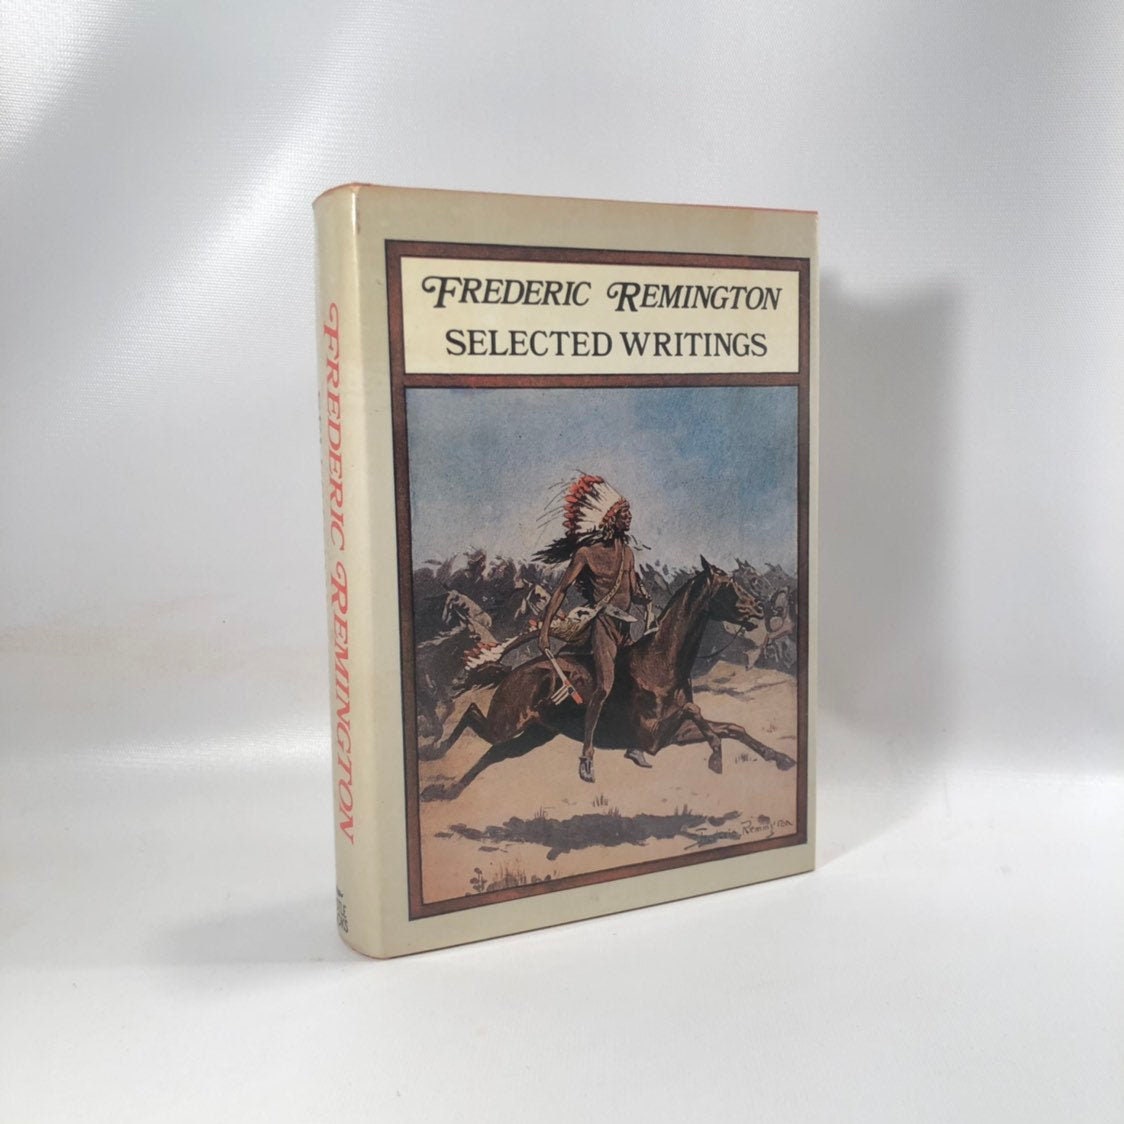 Frederic Remington's Selected Writings  A Vintage 1981 Book Vintage Book